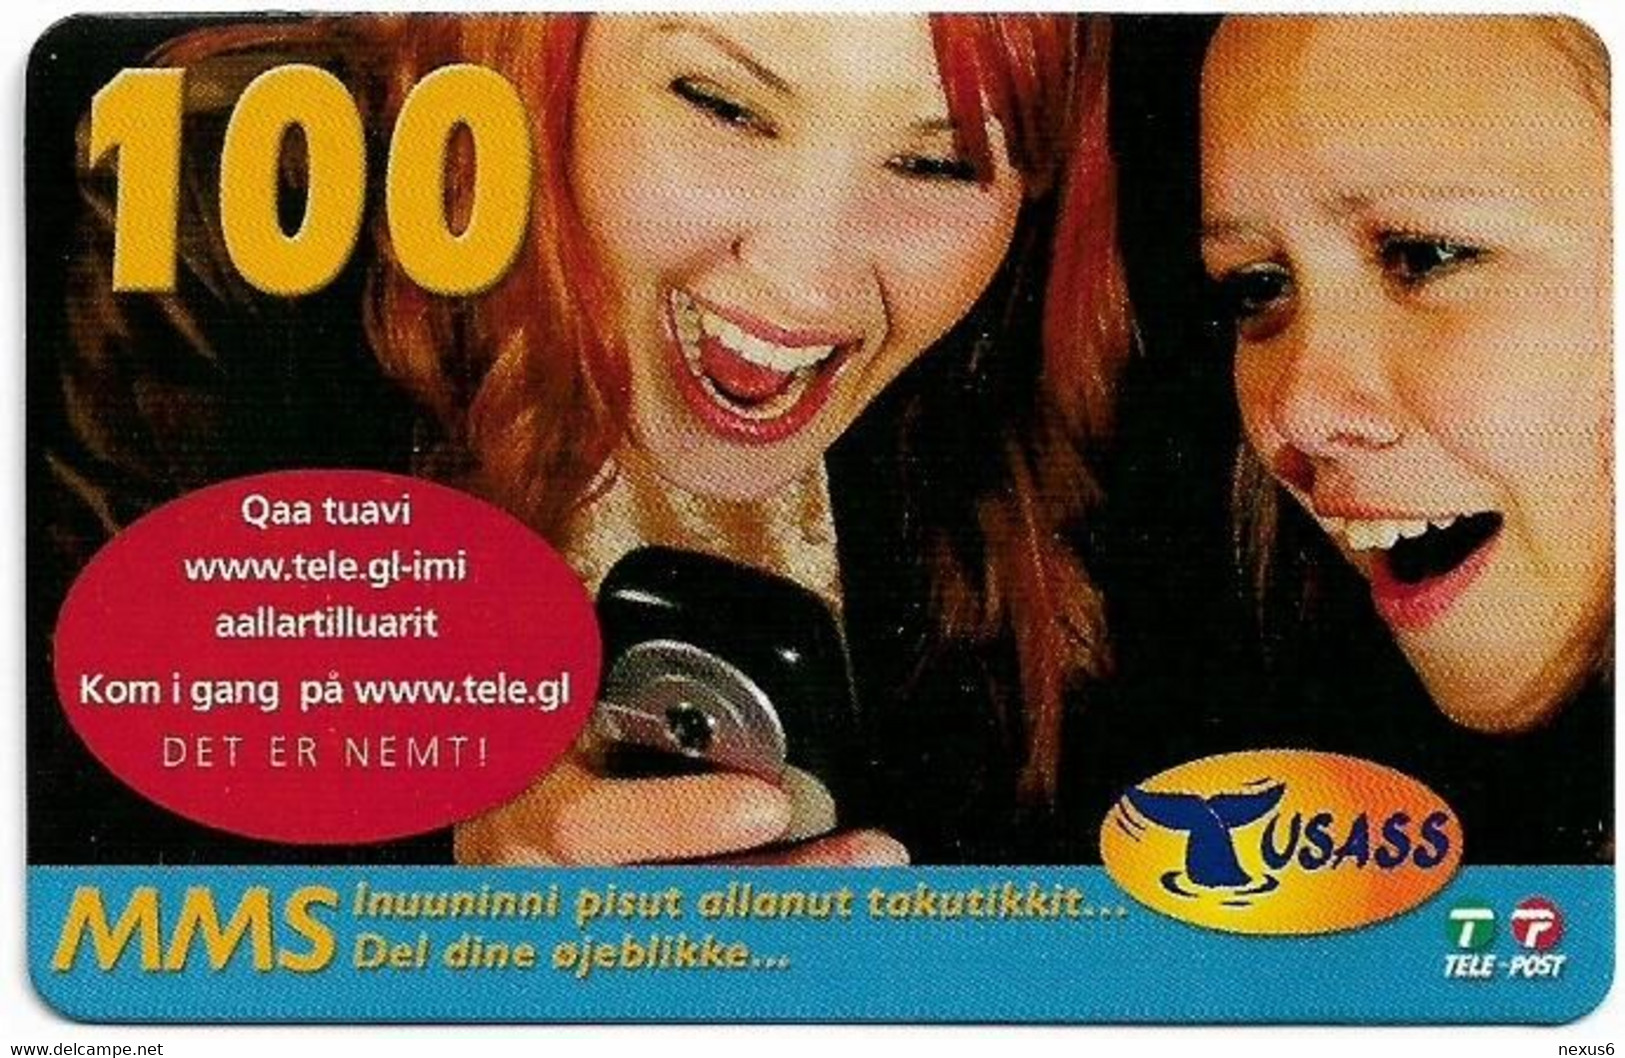 Greenland - Tusass - 2 Girls With Mobile, GSM Refill, 100kr. Exp. 17.05.2009, Used - Greenland